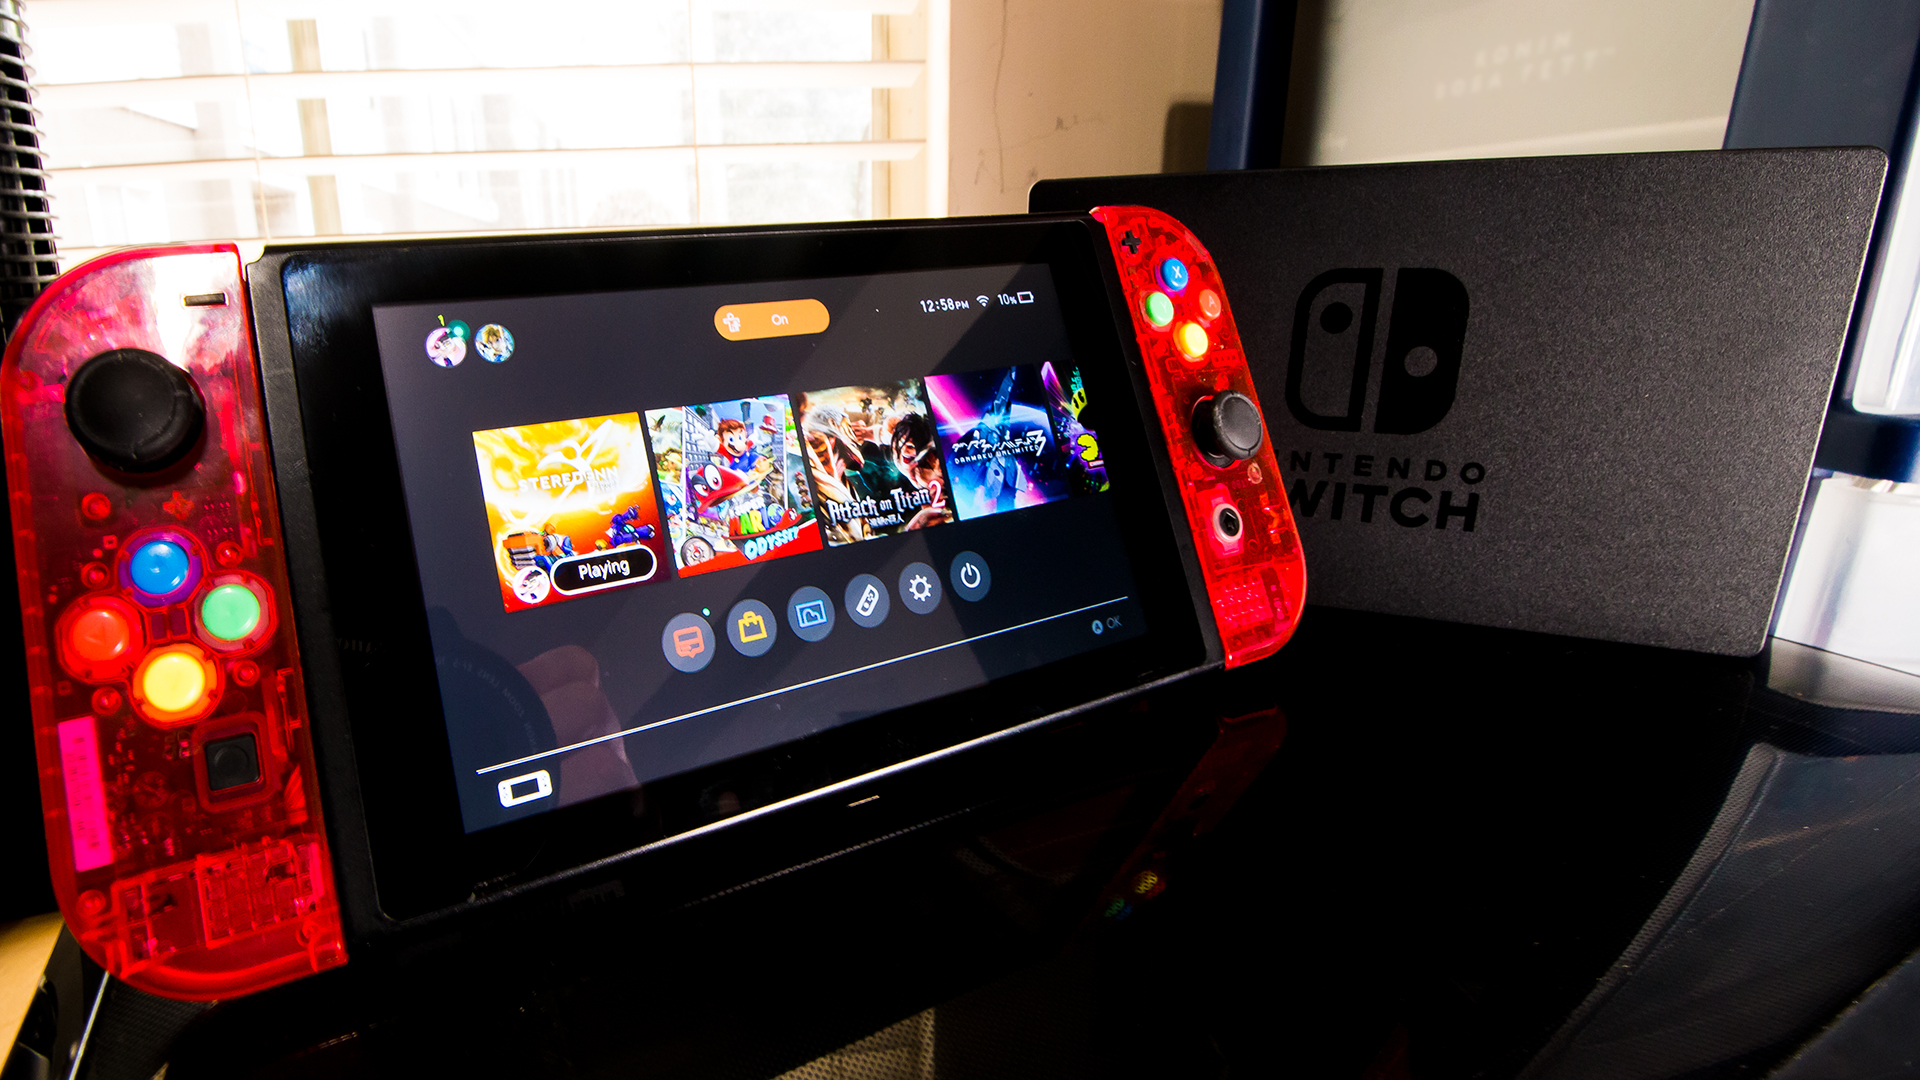 Nintendo Switch Does Not Require Any Subscription For Many Games Like Fortnite